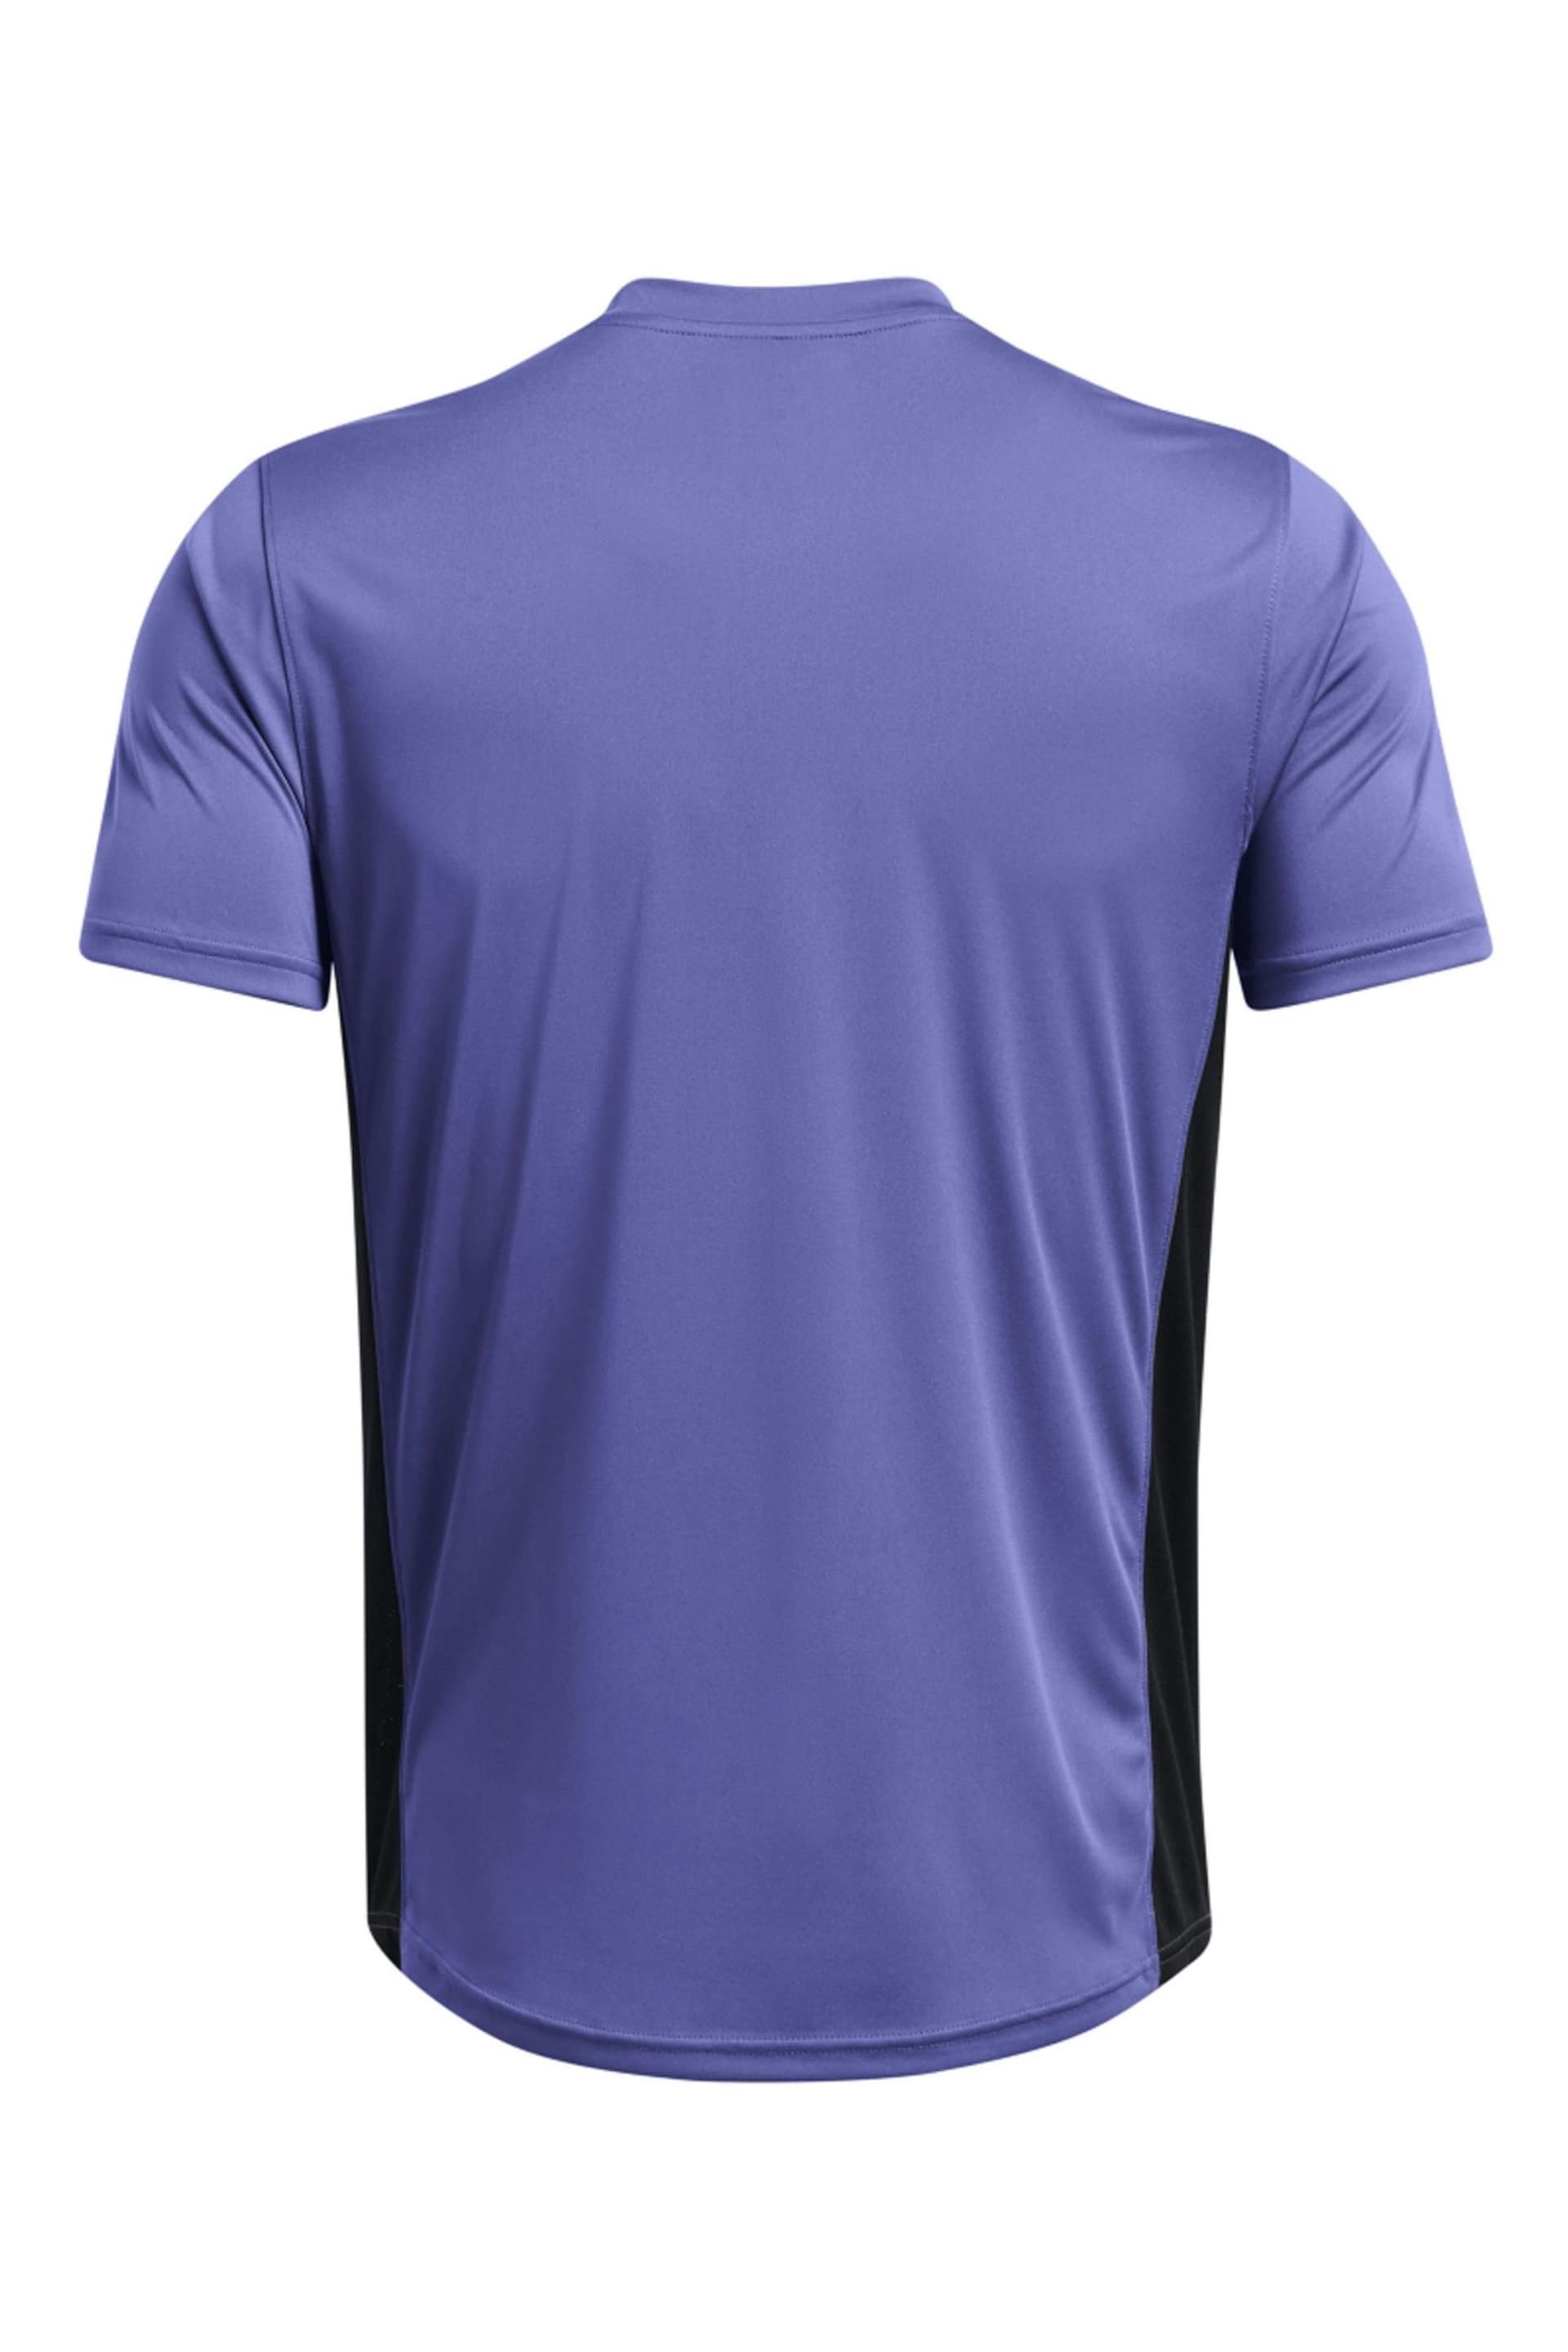 Under Armour Pale Blue Challenger T-Shirt - Image 4 of 4